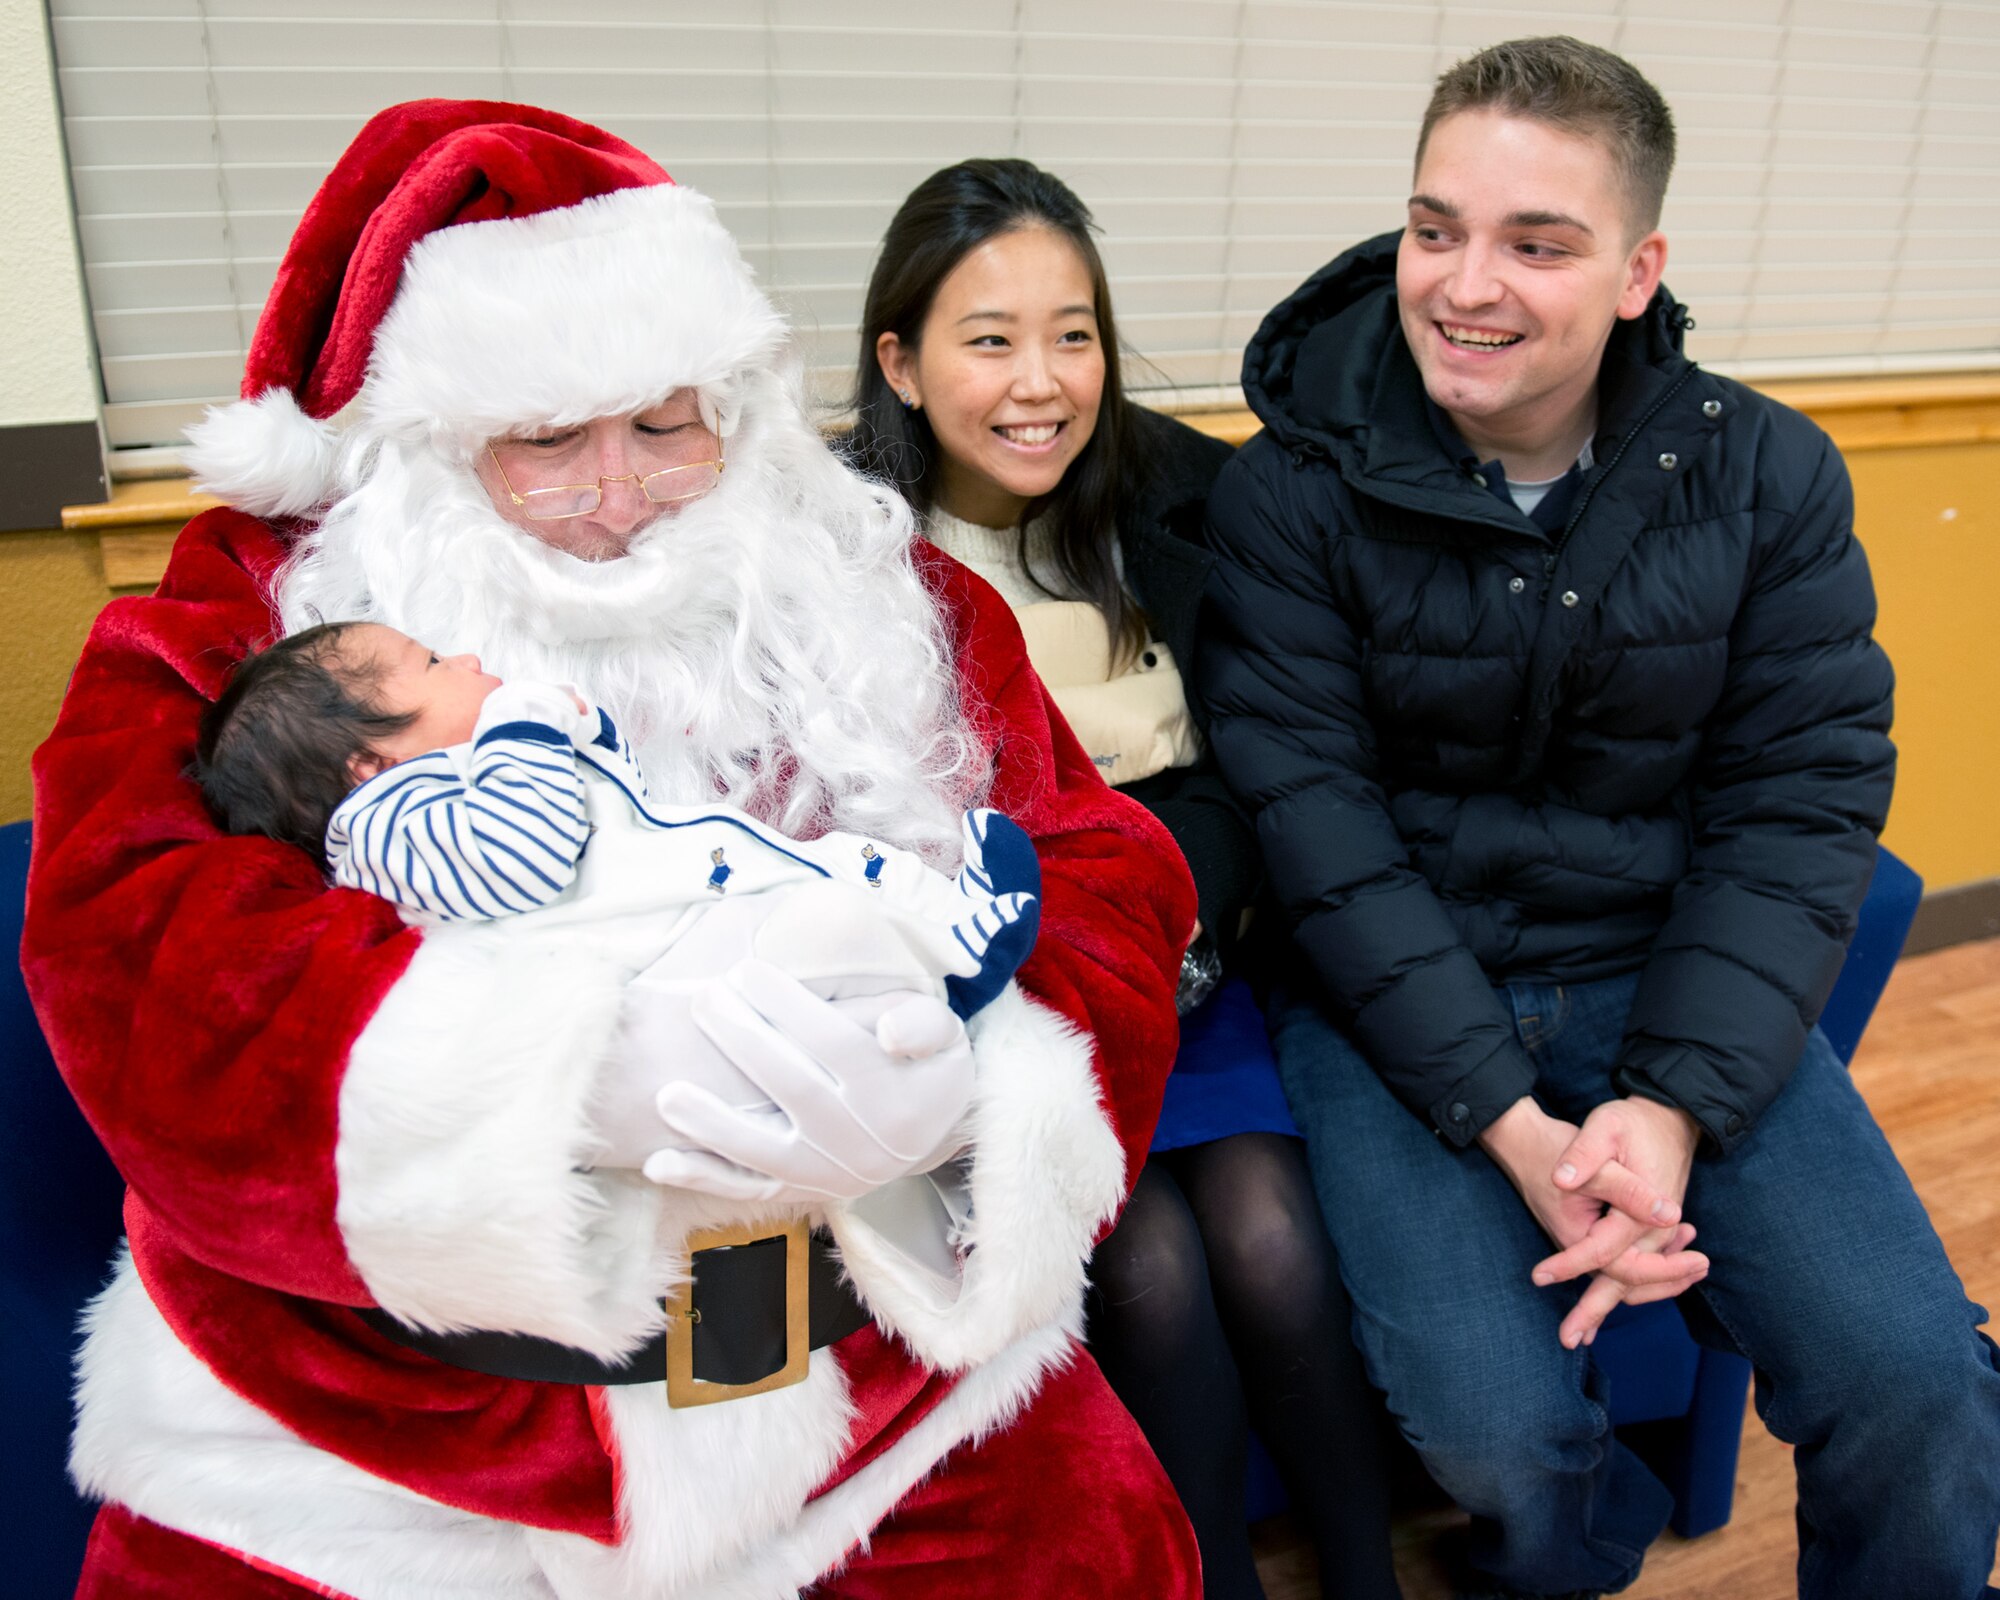 Staff Sgt. Brian Nix (right), 60th medical Support Squadron, watches as his newborn son Hiro visits with Santa Claus for the first time during the annual holiday tree lighting ceremony at Travis Air Force Base, Calif., Dec. 8, 2016. Patrons were treated to music by the U.S. Air Force Band of the Golden West Quartet, a visit from Santa and refreshments. (U.S. Air Force photo/Louis Briscese)